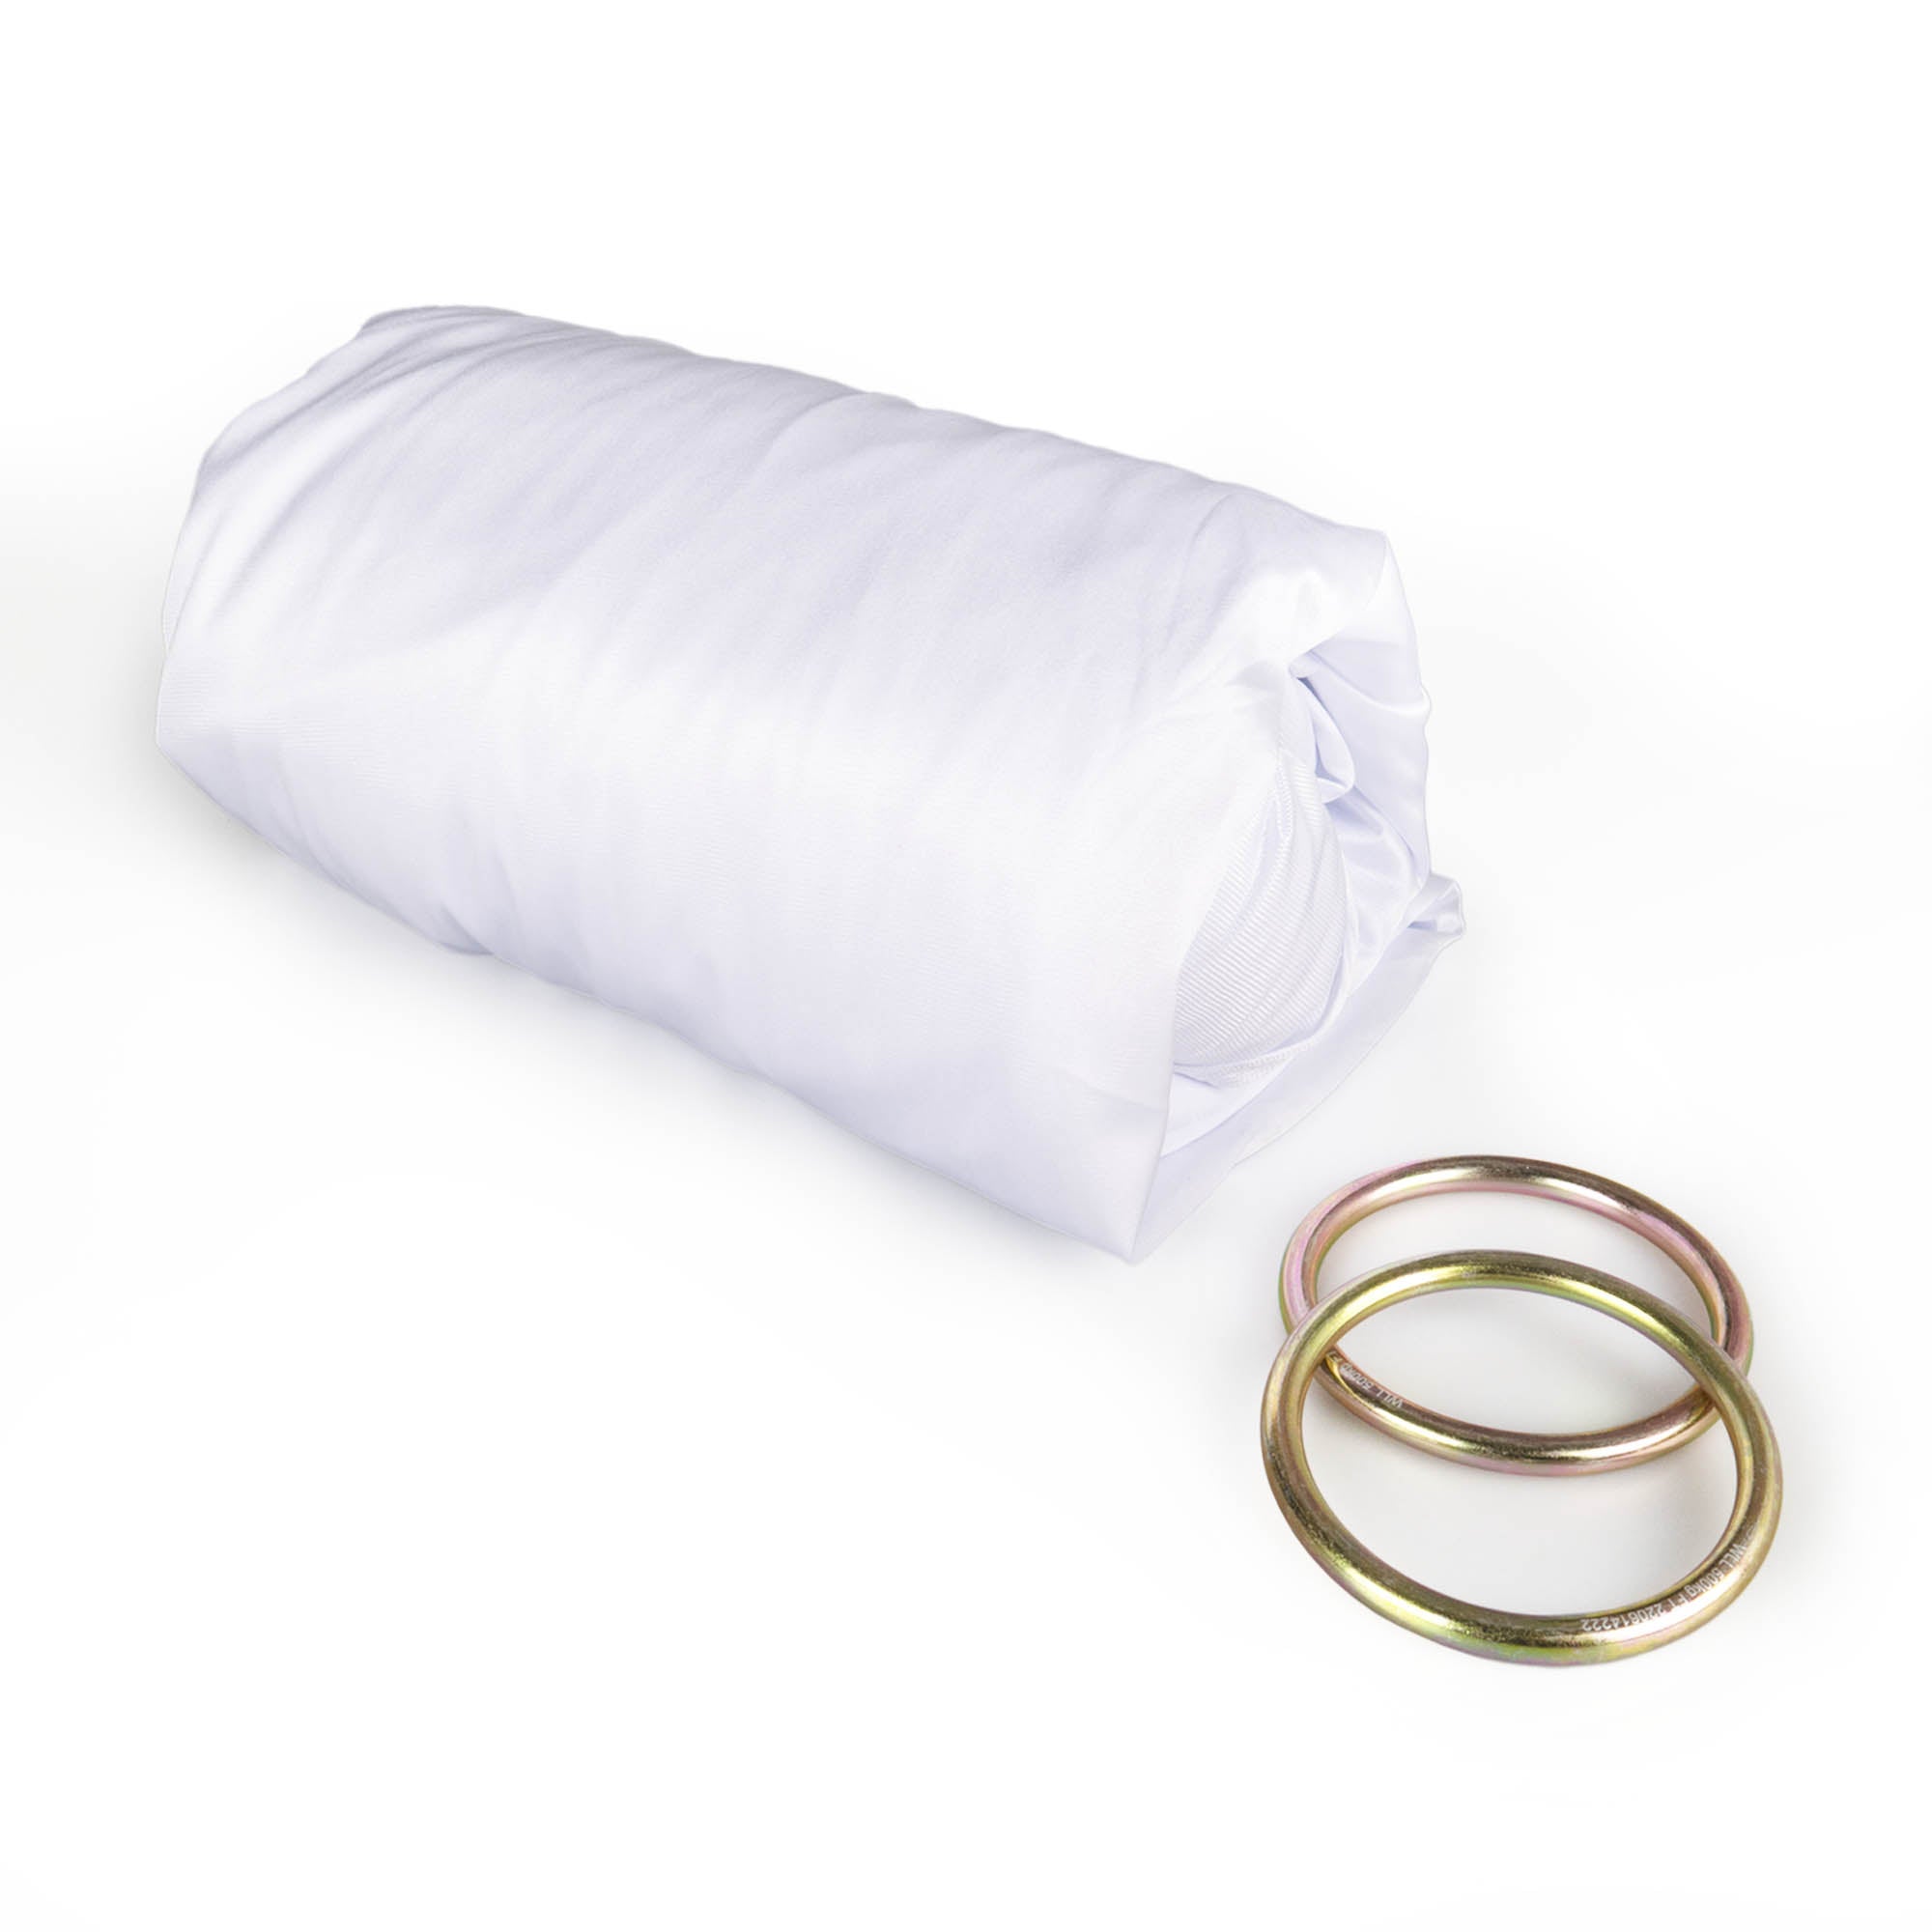 White yoga hammock with O rings detached